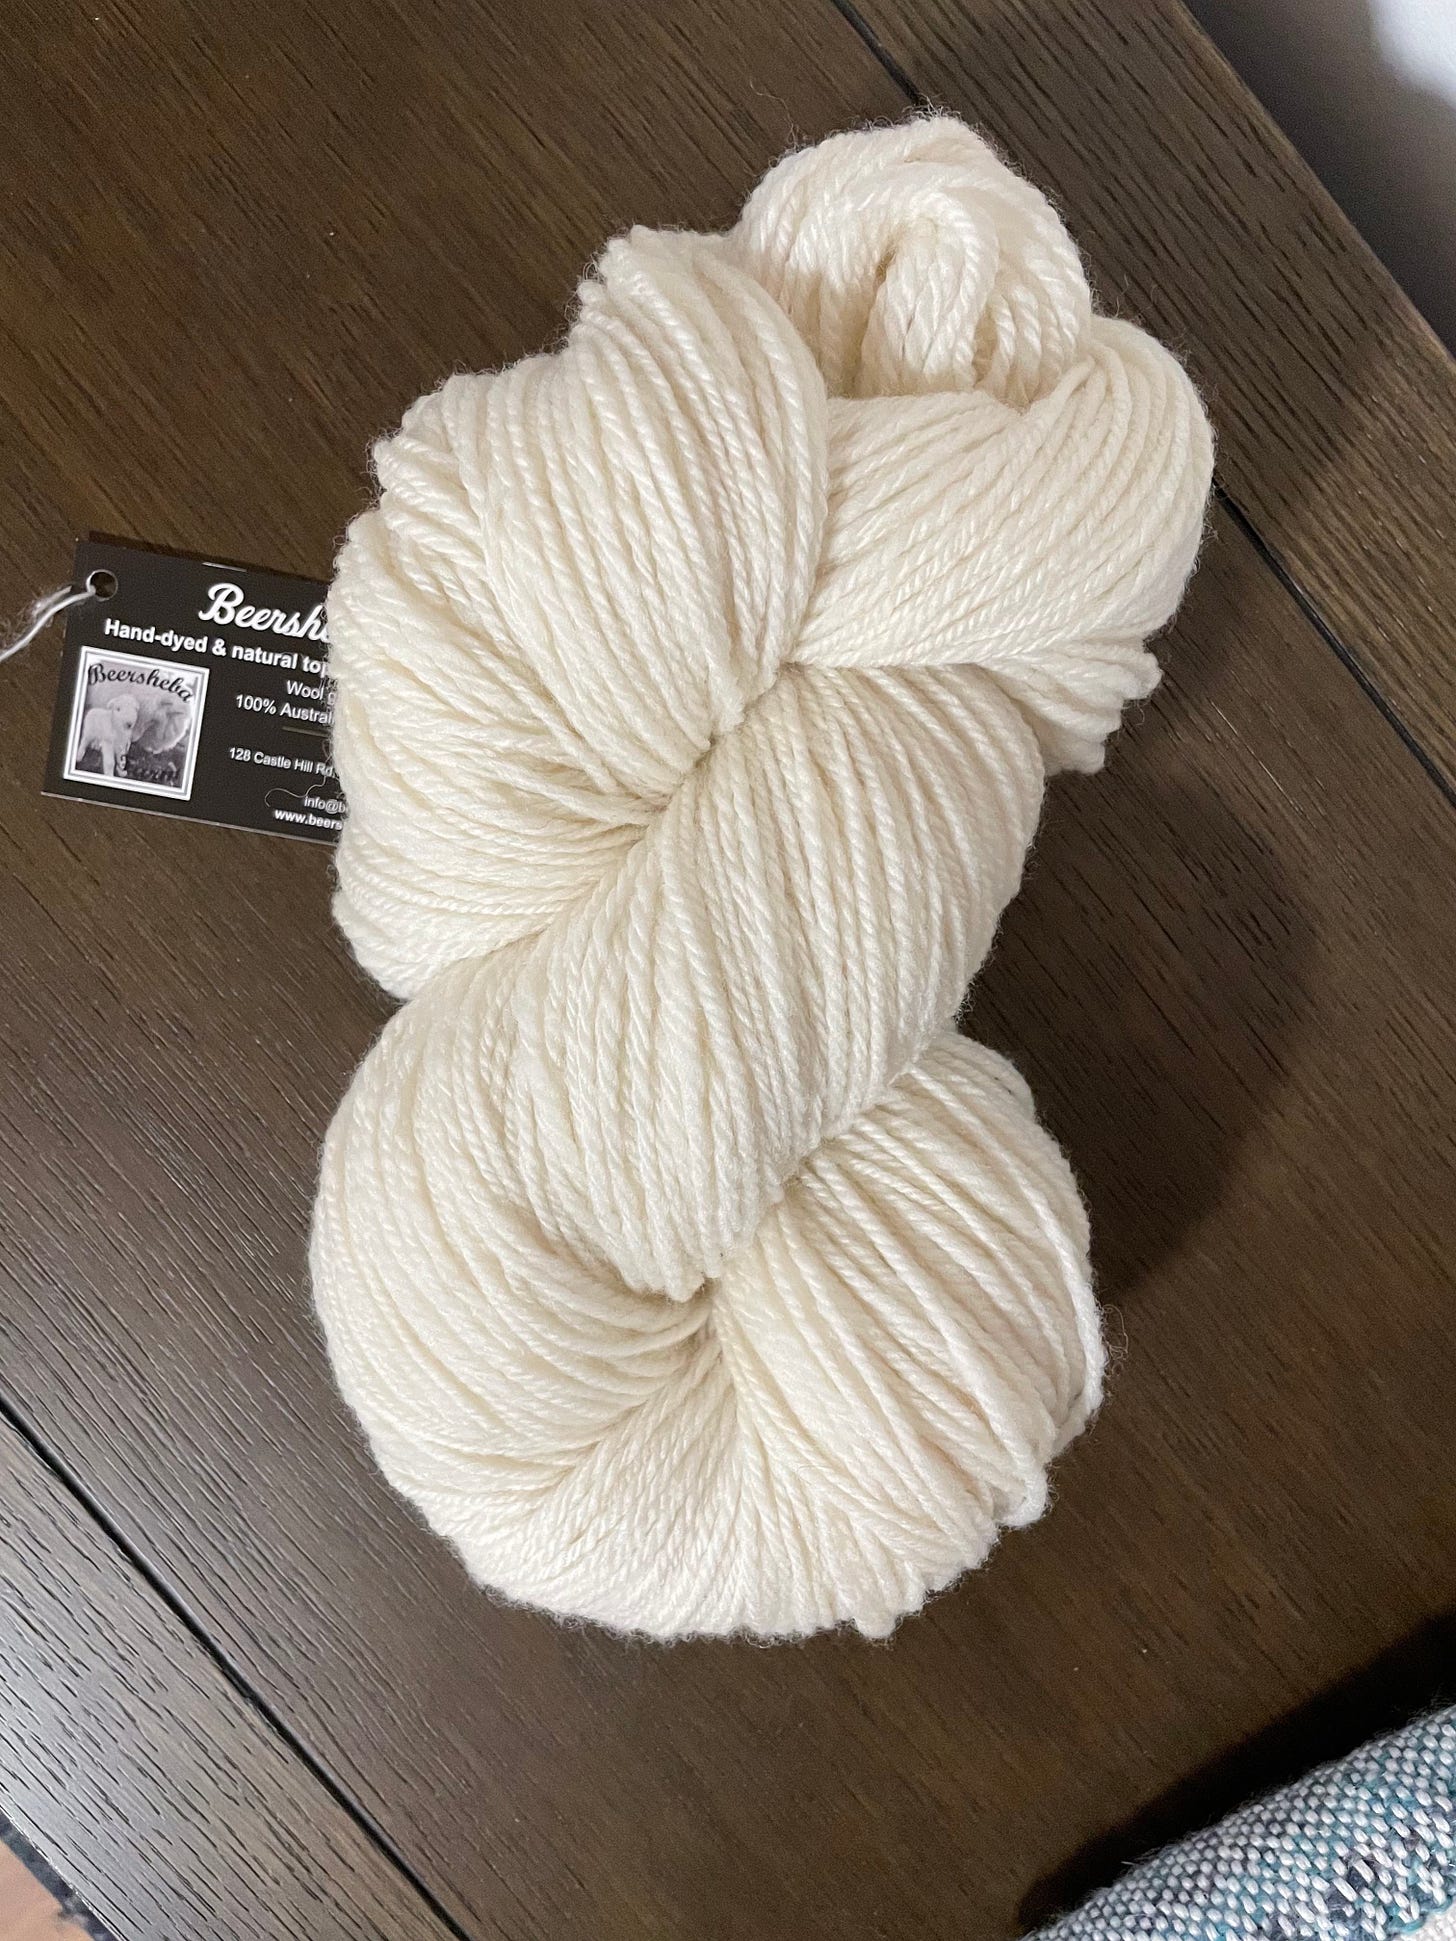 A giant skein of yarn, all white, very fluffy.